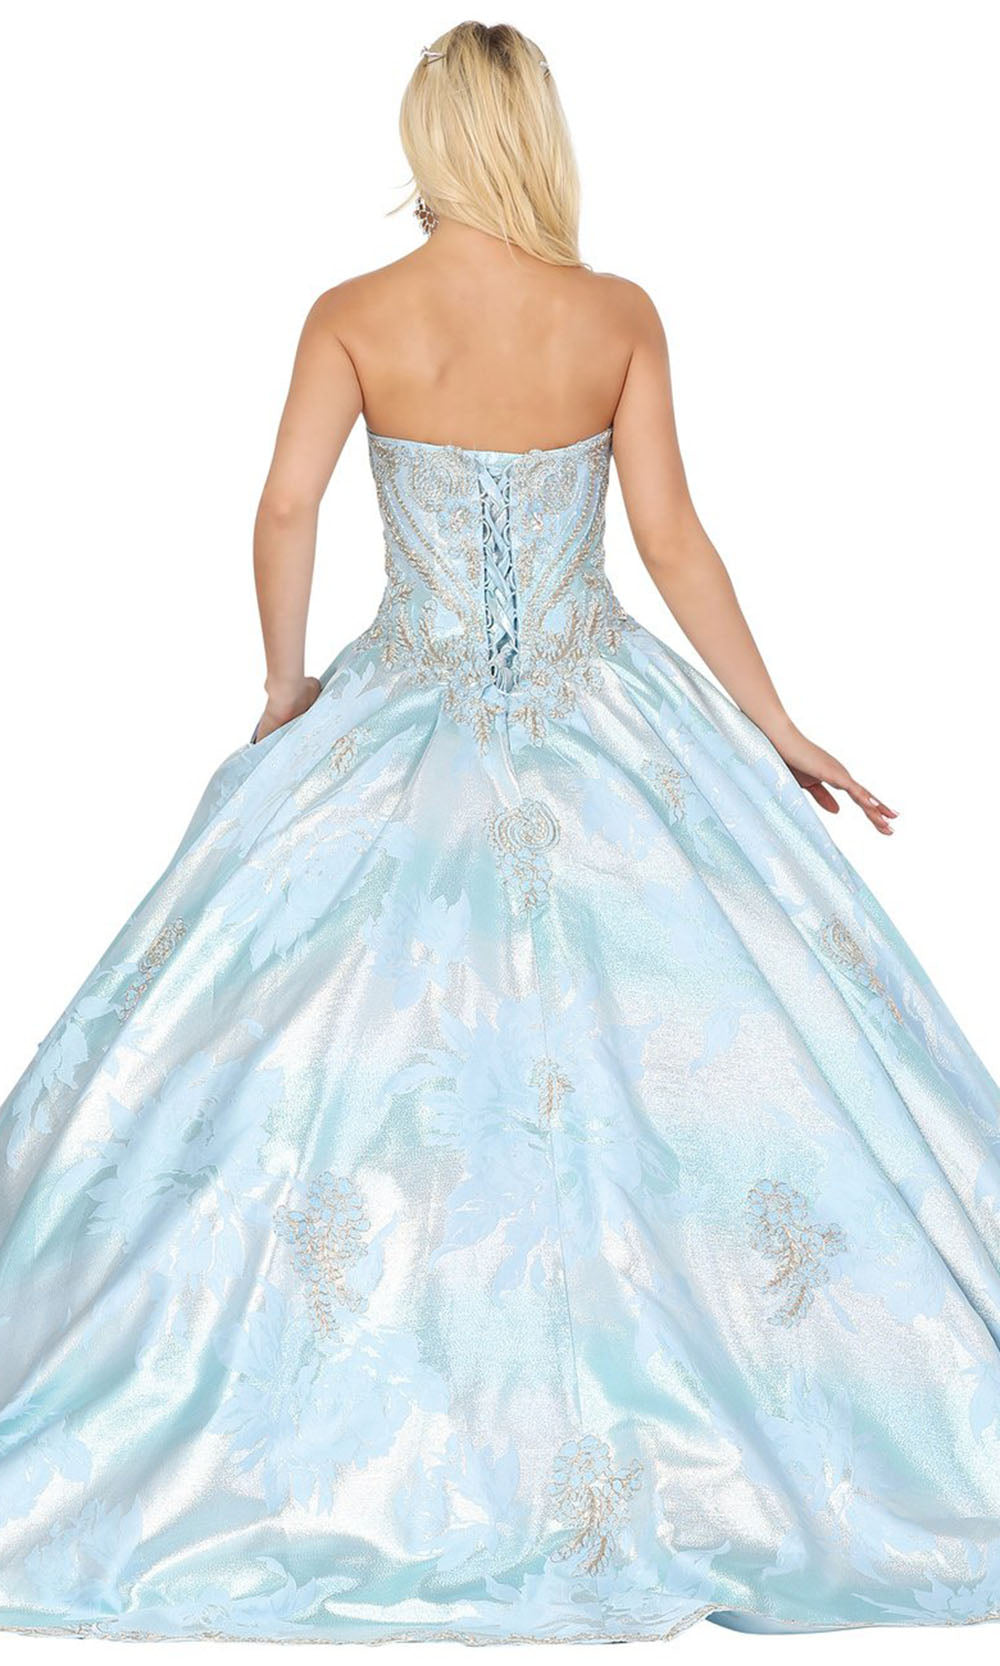 Dancing Queen - 1459 Sweetheart Embellished Floral Gown In Blue